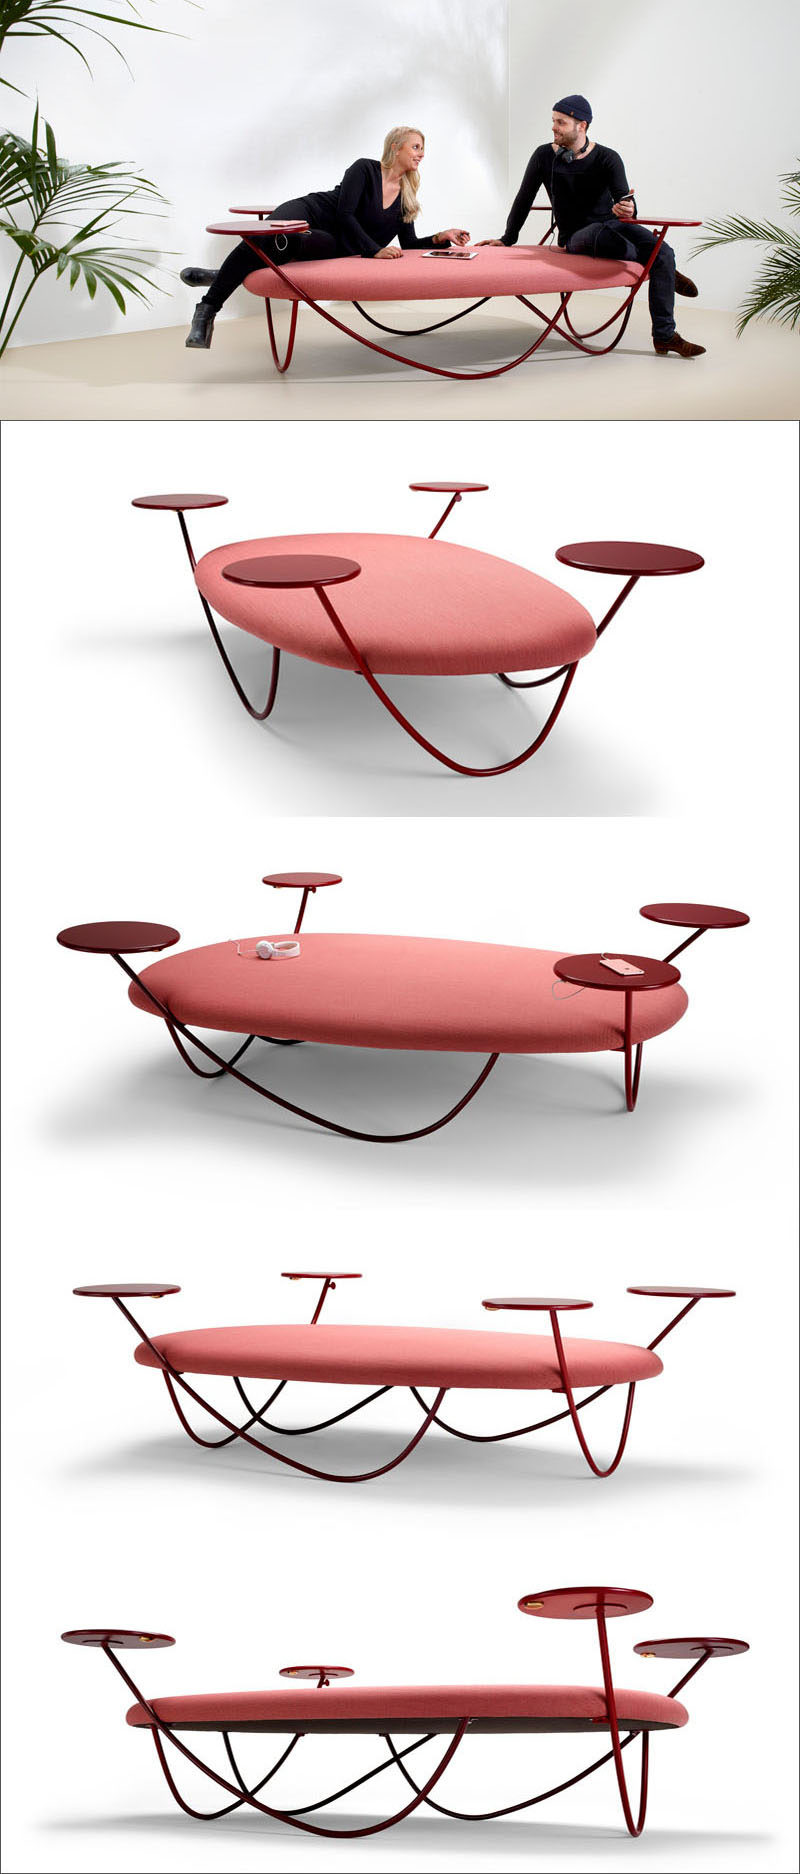 Swedish design group Front, have recently completed Dune, an informal and relaxed seating option for offices and public spaces, that includes USB charging ports under the small tables.